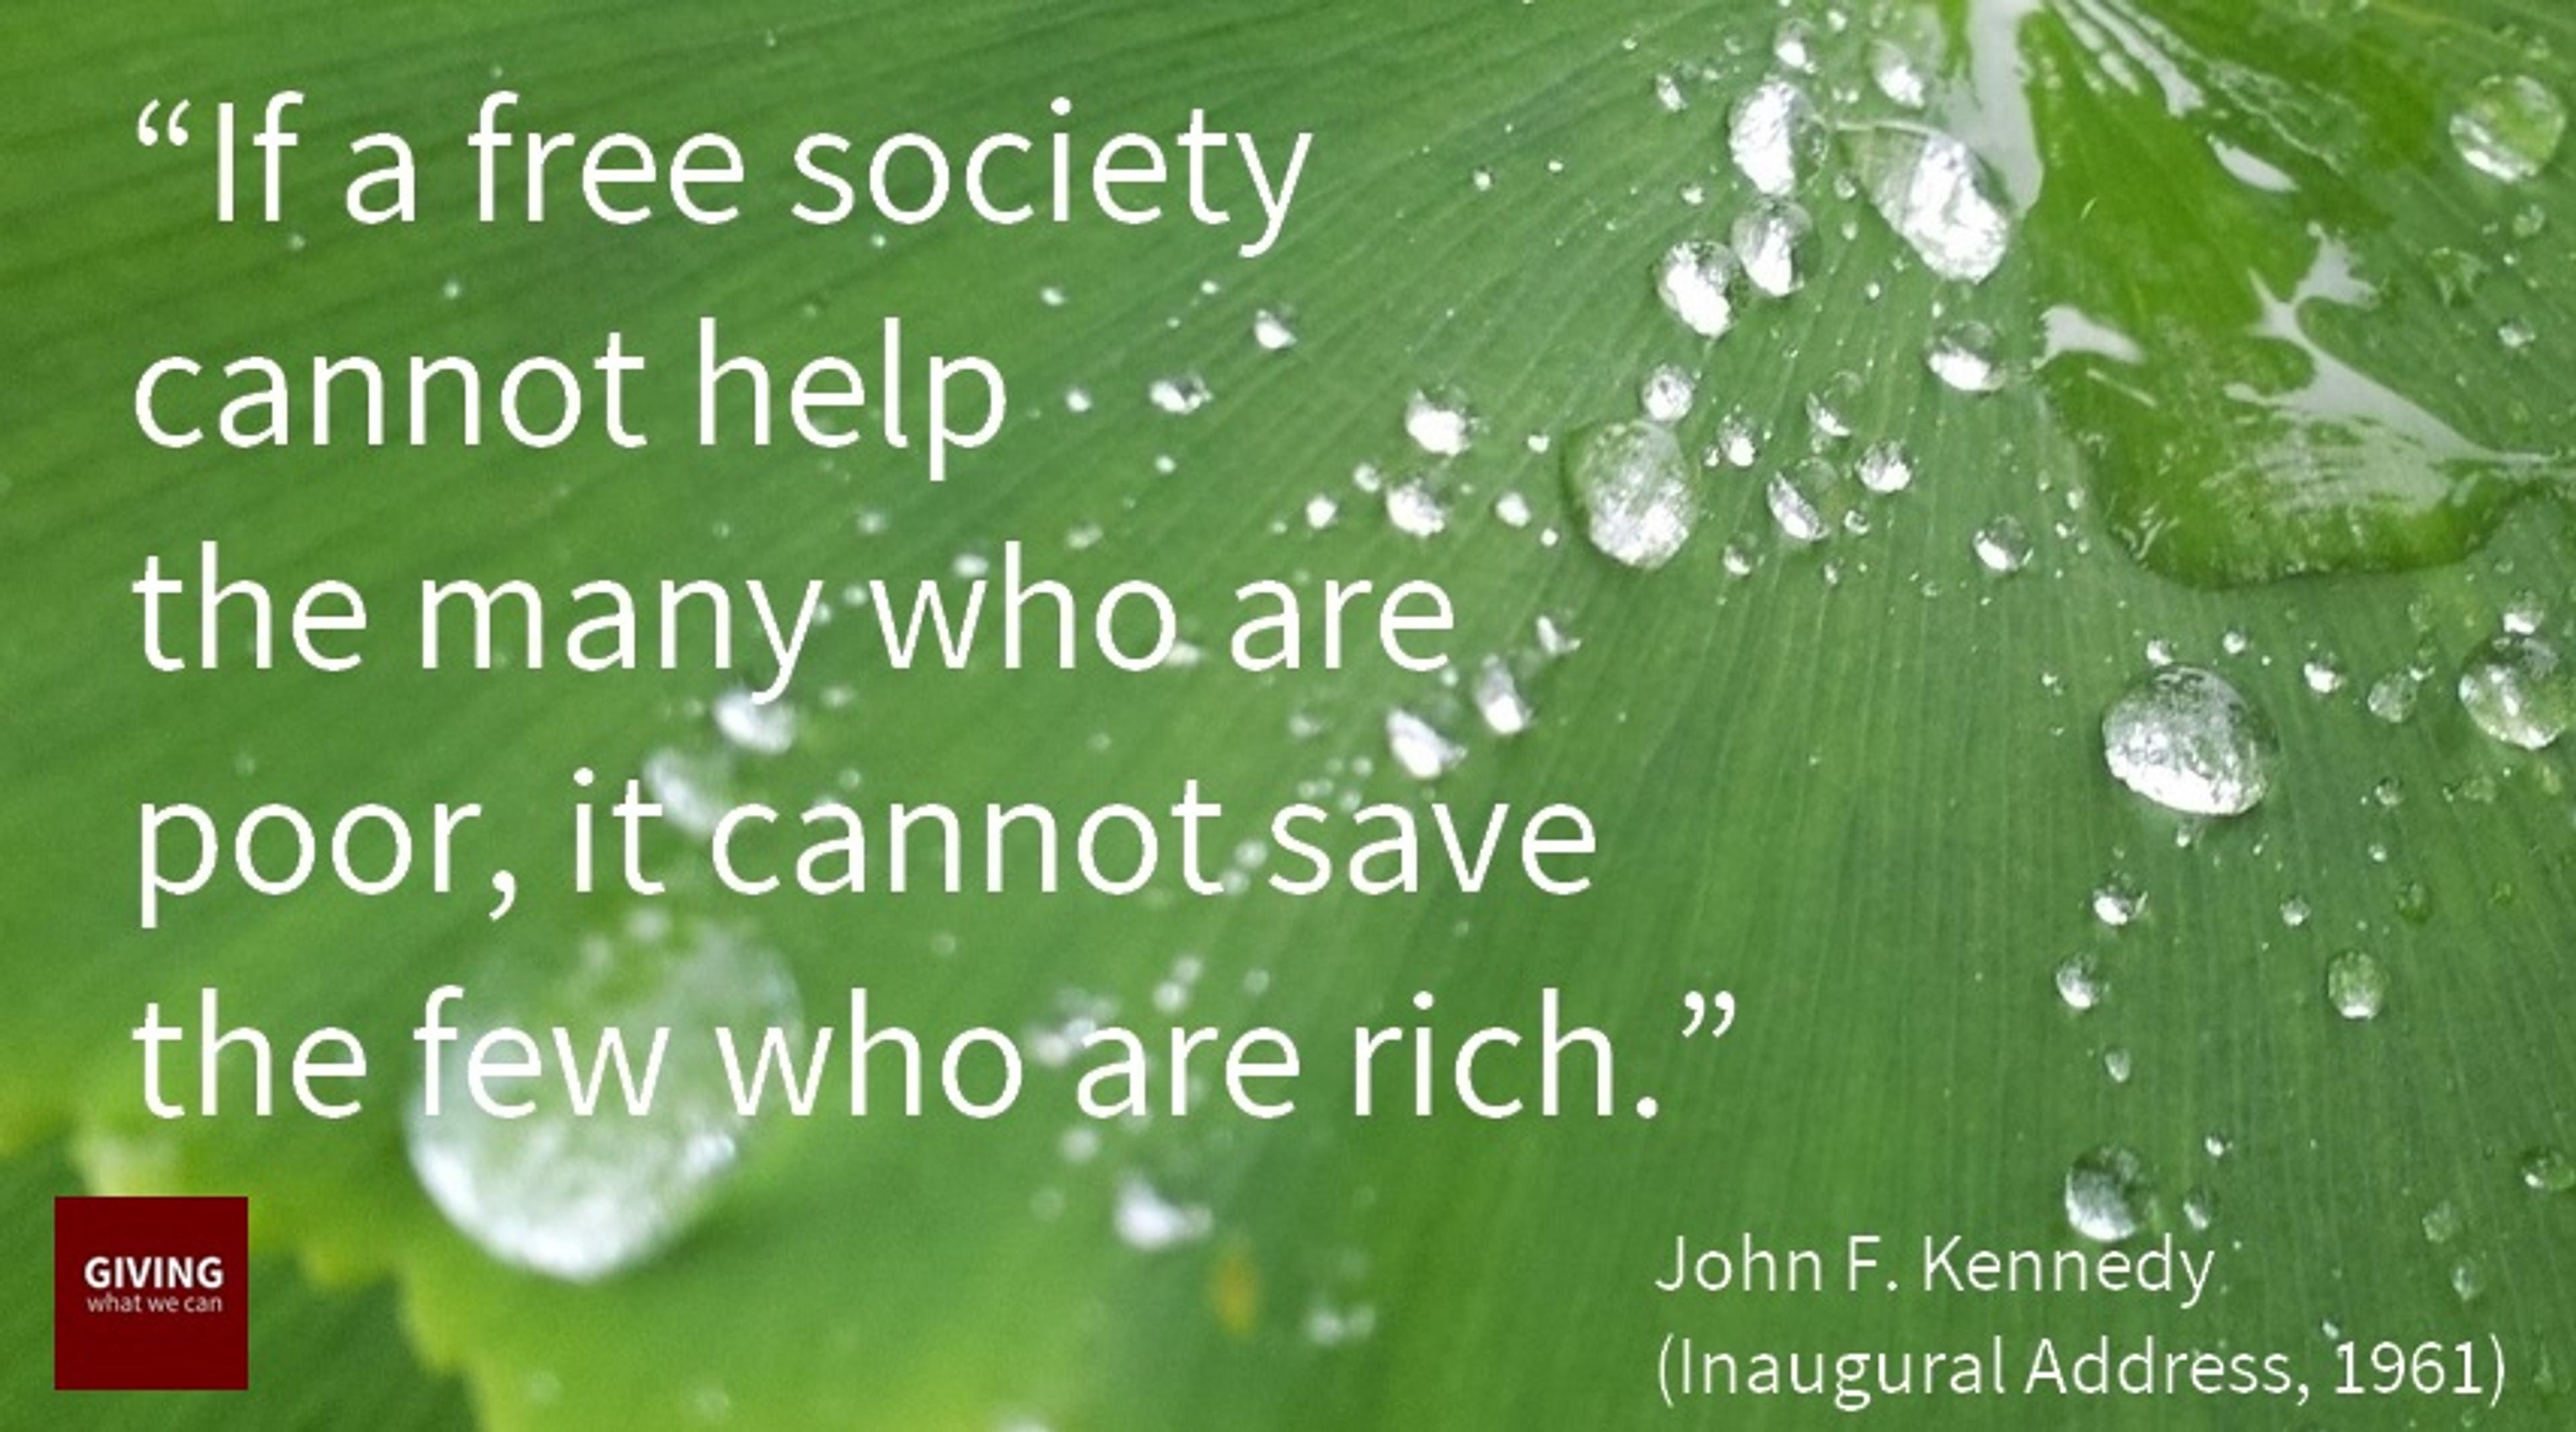 If a free society cannot help the many who are poor, it cannot save the few who are rich